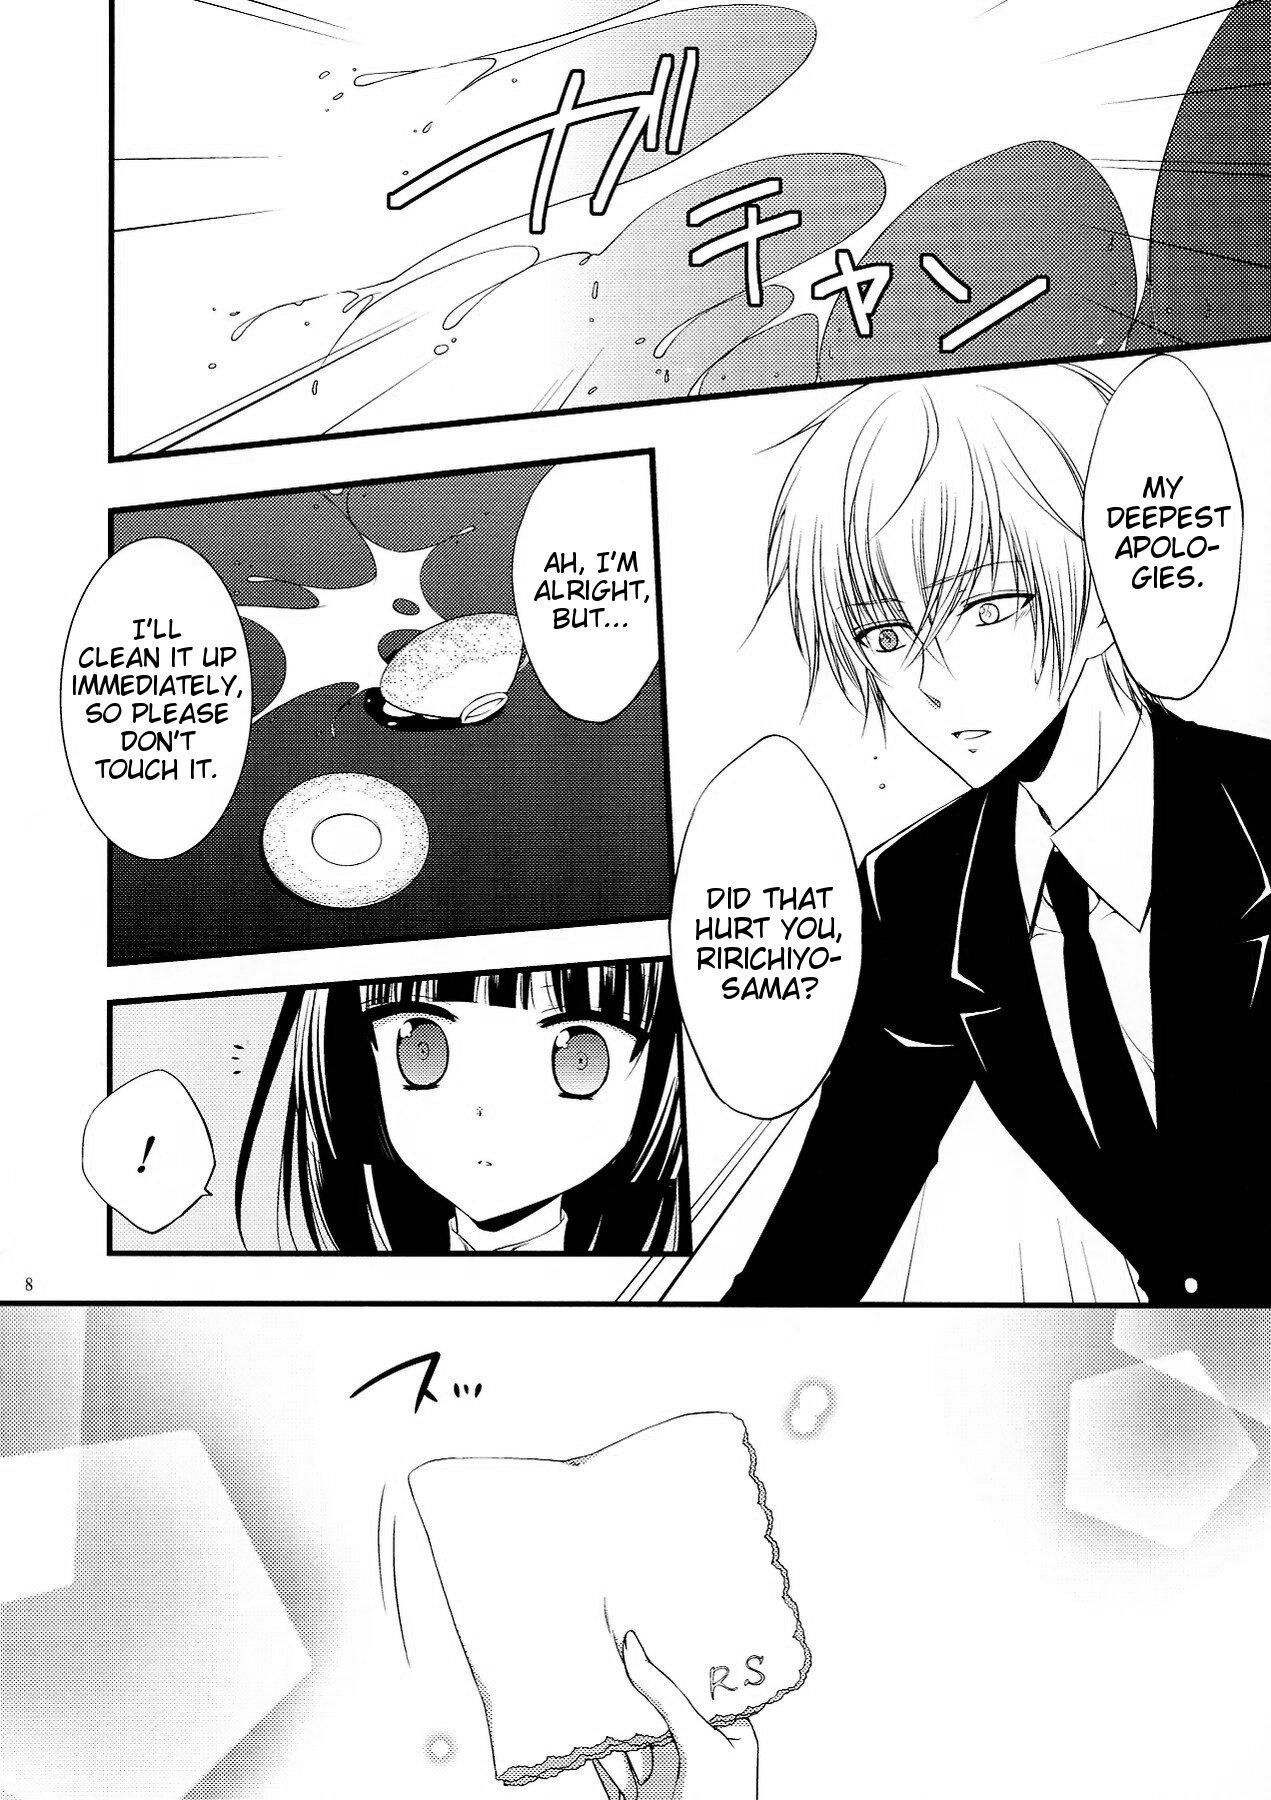 Messy God bless you - Inu x boku ss Caught - Page 8